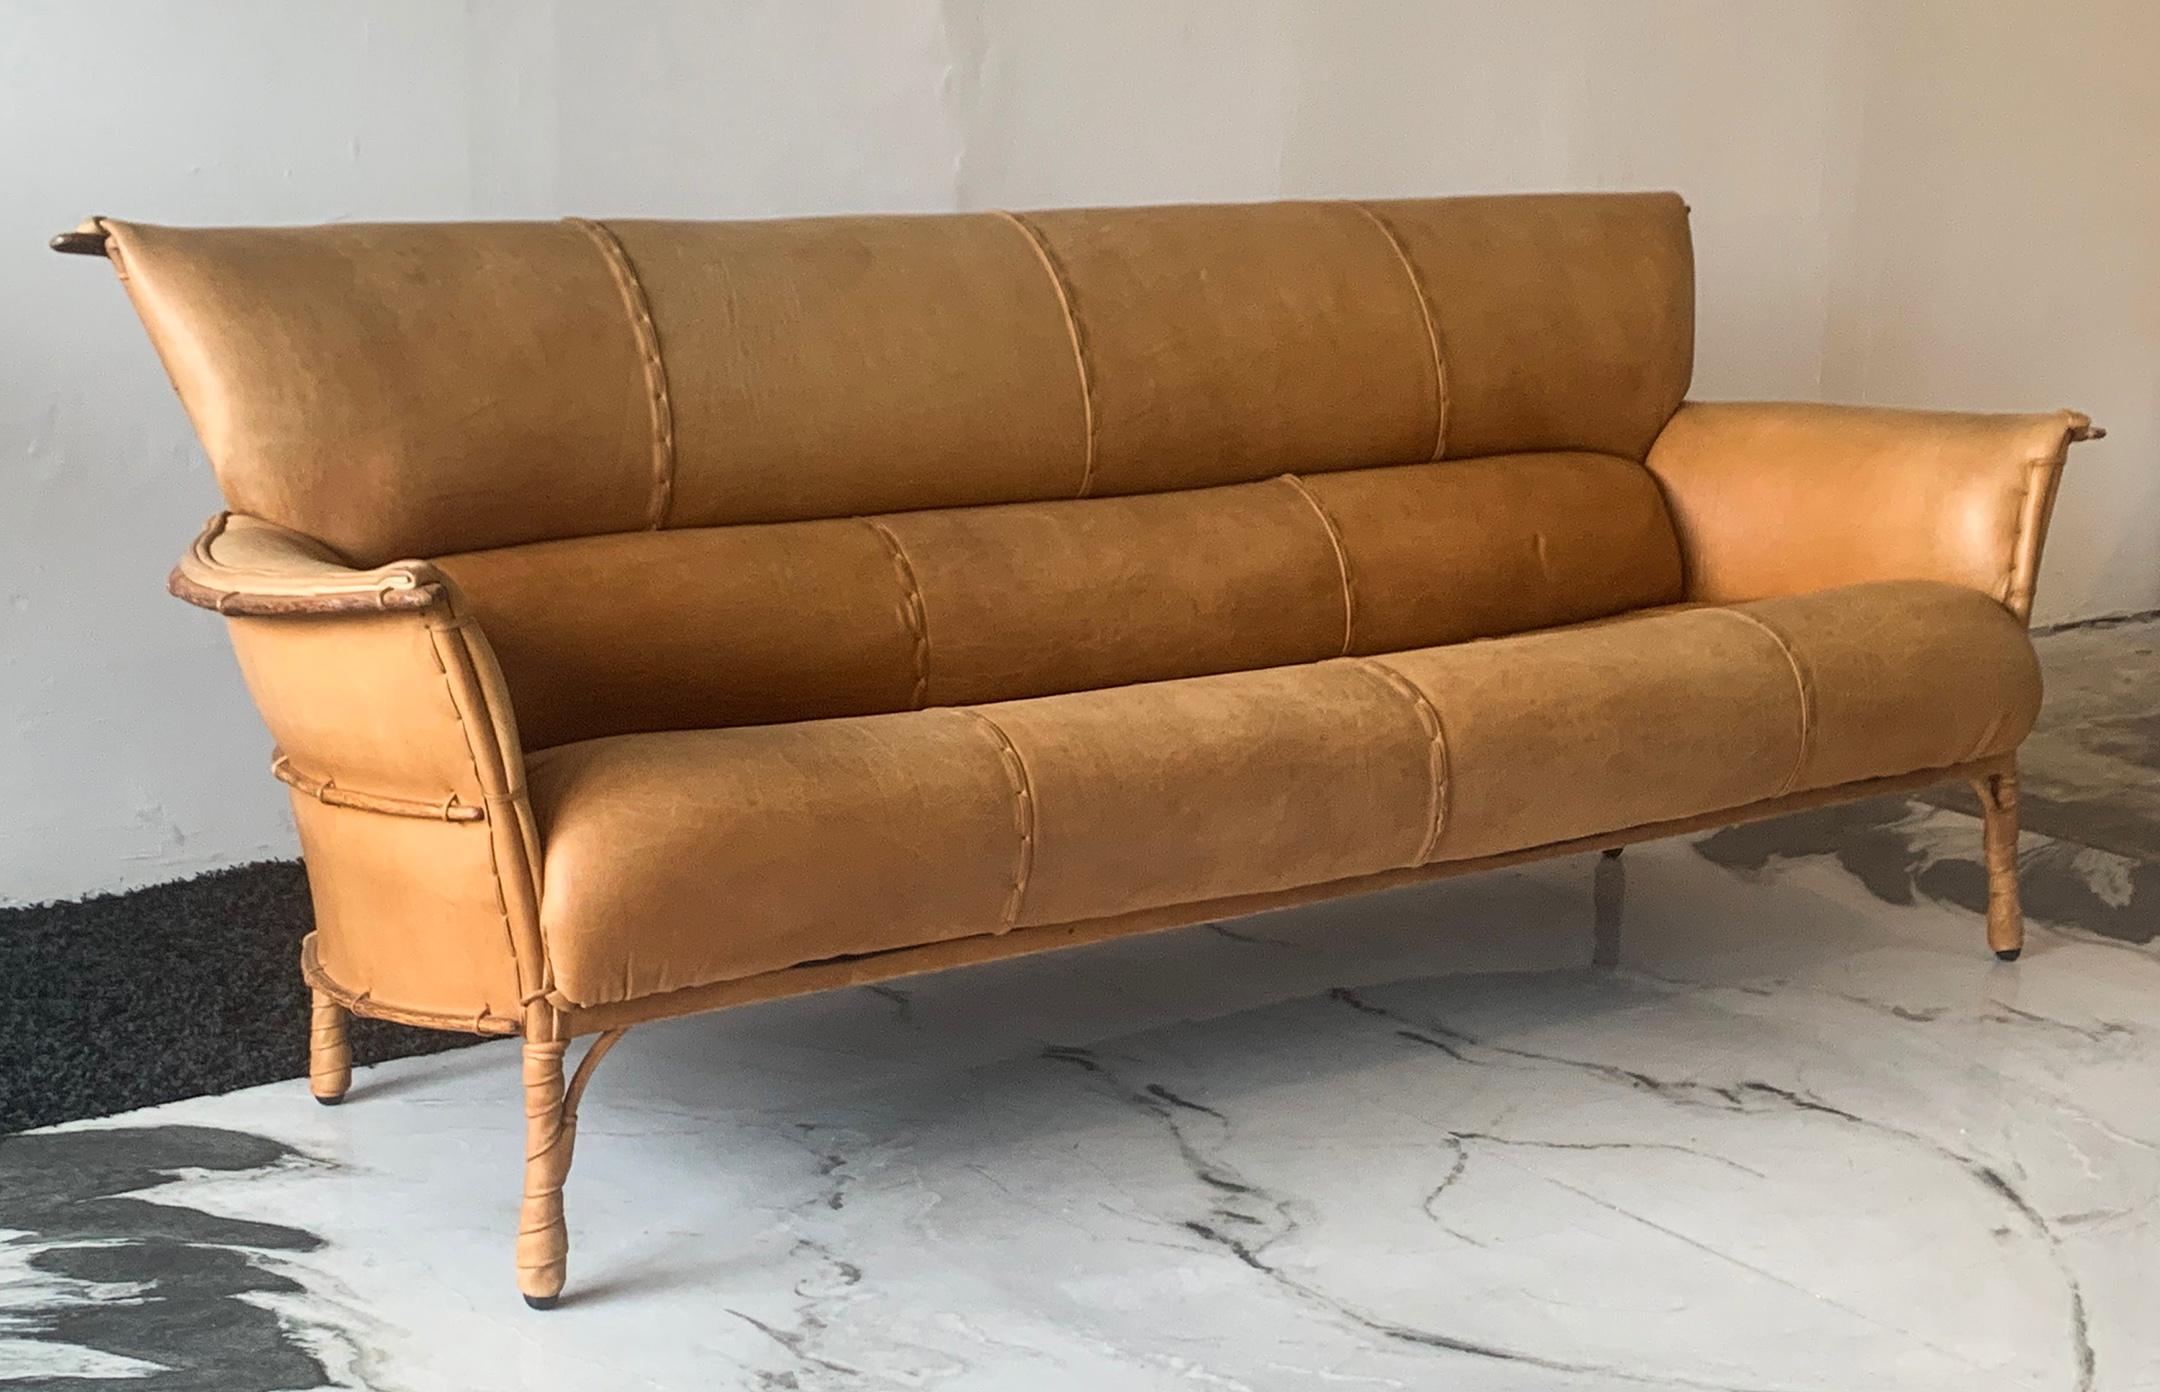 One look at this sofa and it's obvious that it's special. Designed by Pacific Green Furniture, this cognac leather clad sofa features palm wood ribs / boning throughout the frame and back that echo the canoe building techniques by Indigenous and